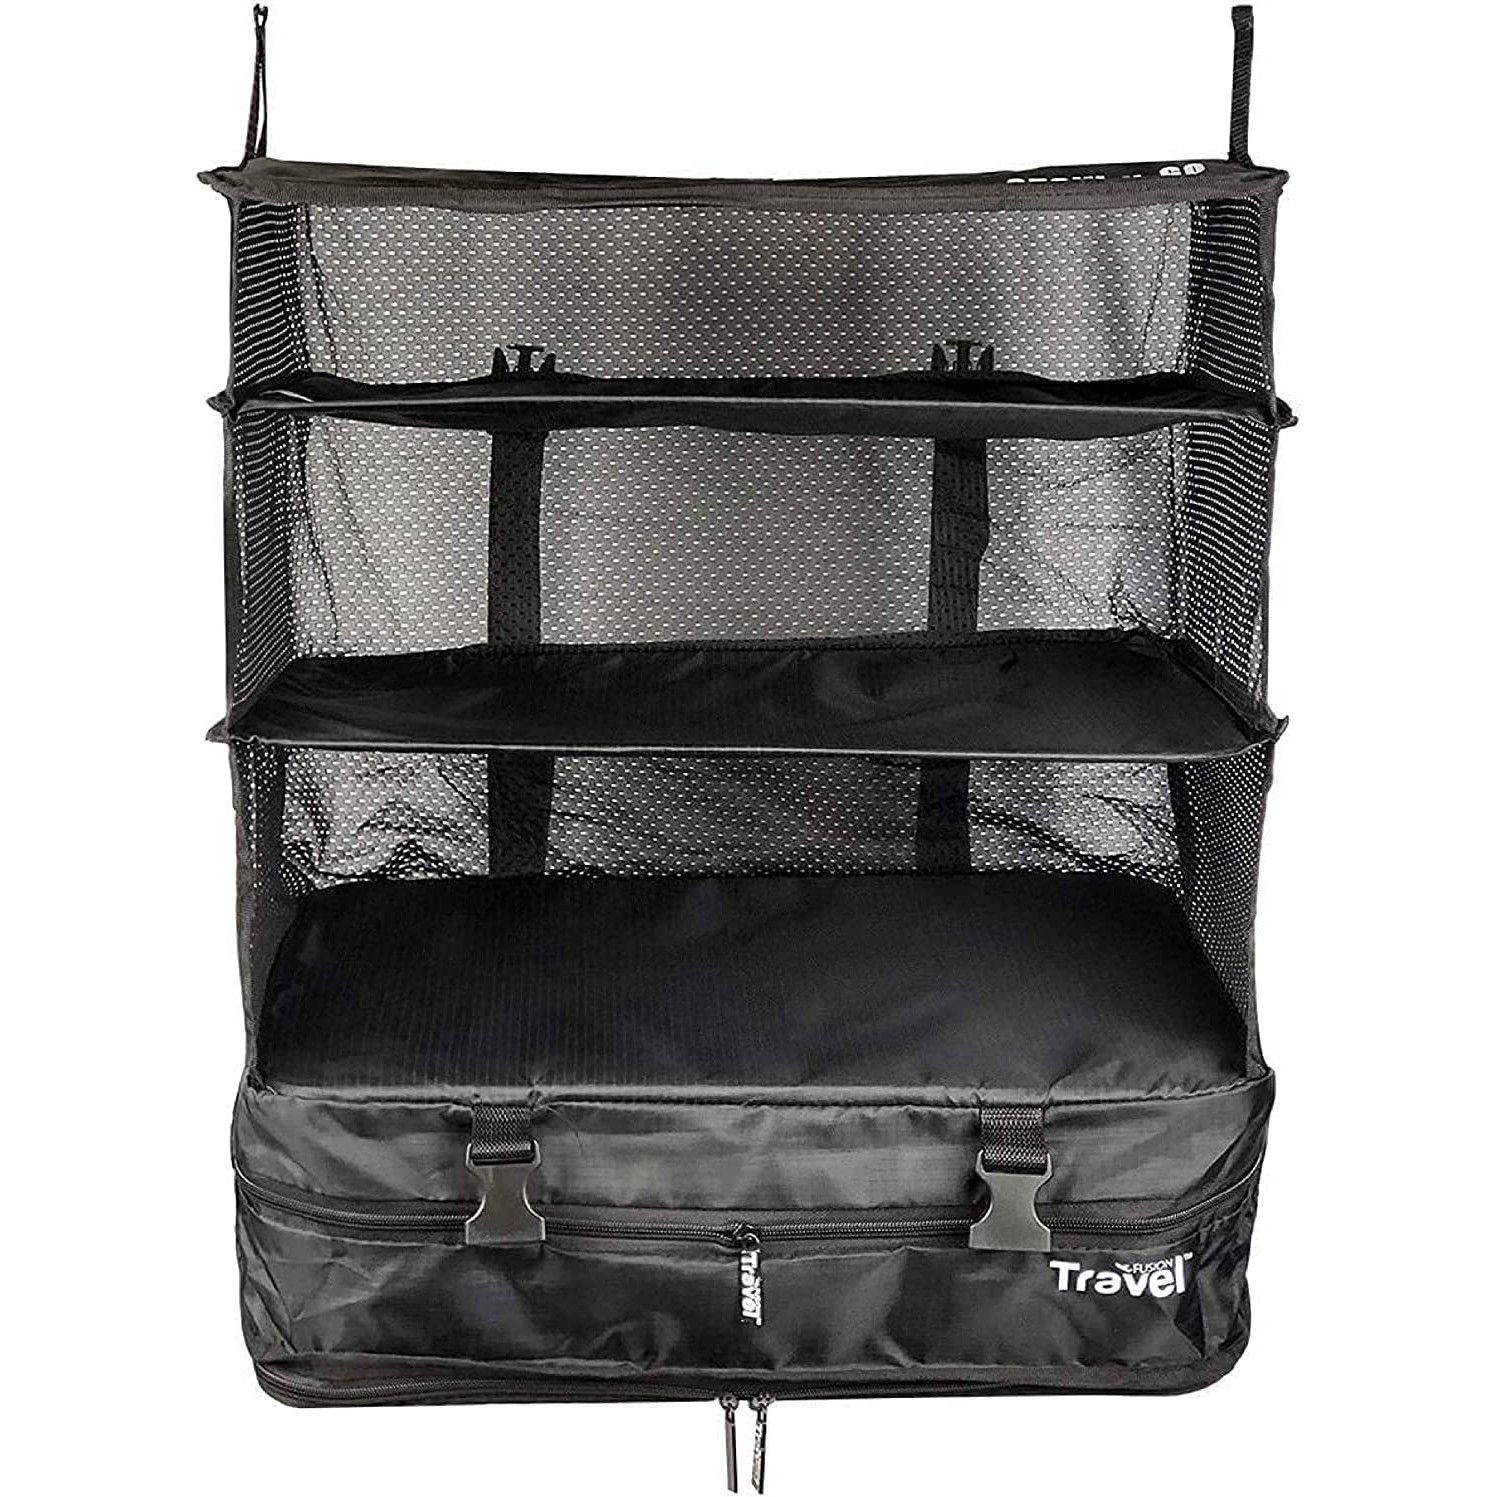 Grand Fusion Stow-n-go Space Saving Travel Luggage Organizer And With Built  In Hanging Shelves And Laundry Storage Compartment - Small - Light Gray :  Target